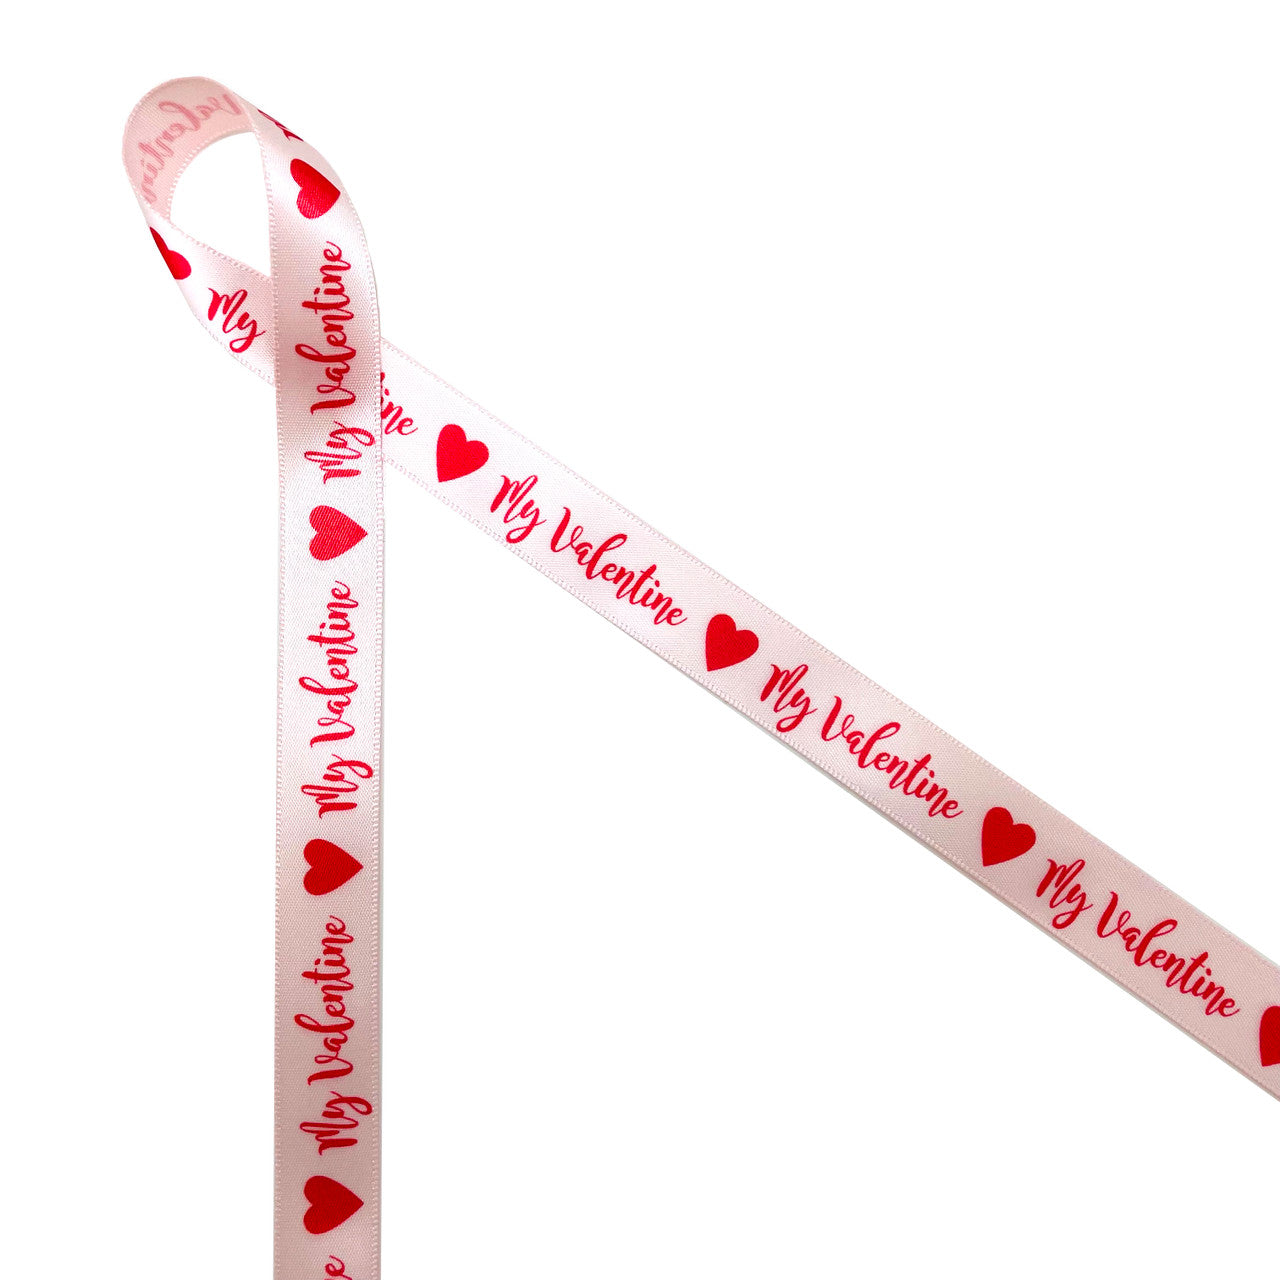 My Valentine in red with red hearts printed on 5/8" pink single face satin ribbon is a fun expression of love and affection for anyone on Valentine's Day. This is a fun ribbon for gift wrap, gift baskets, party favors, candy shops and chocolatiers. Use this ribbon on cookie favors, cake pops and sweets tables too! All our ribbon is designed and printed in the USA